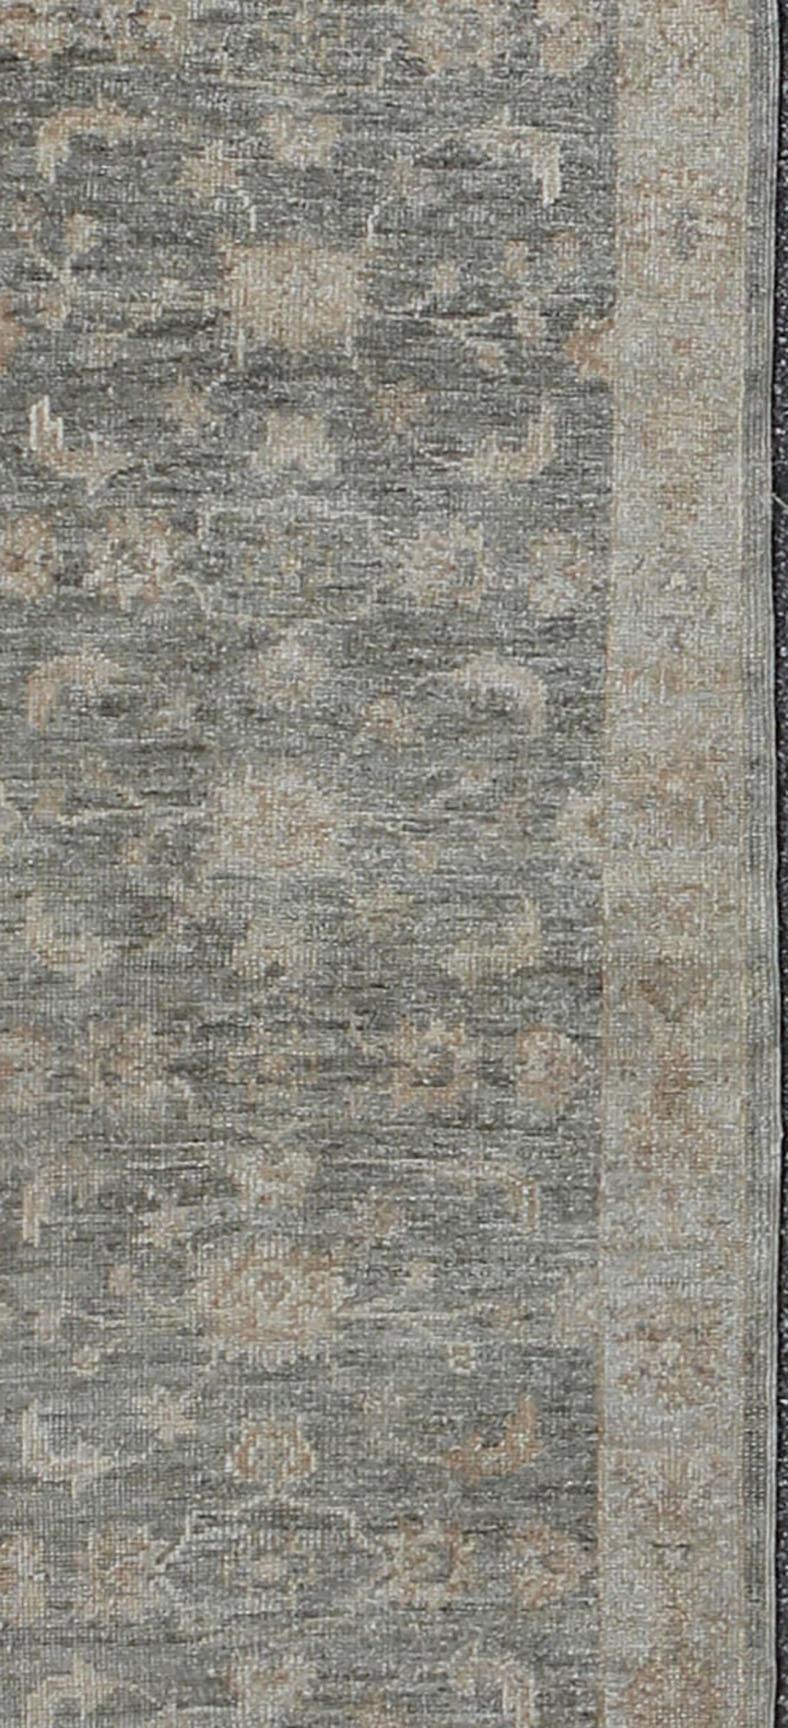 Green grey, grey, light yellow green angora Oushak runner from Turkey, rug AN-123970, country of origin / type: Turkey / Angora Oushak

Measures: 2'9 x 15'

From our Angora Collection, this piece is made with a combination of angora and old